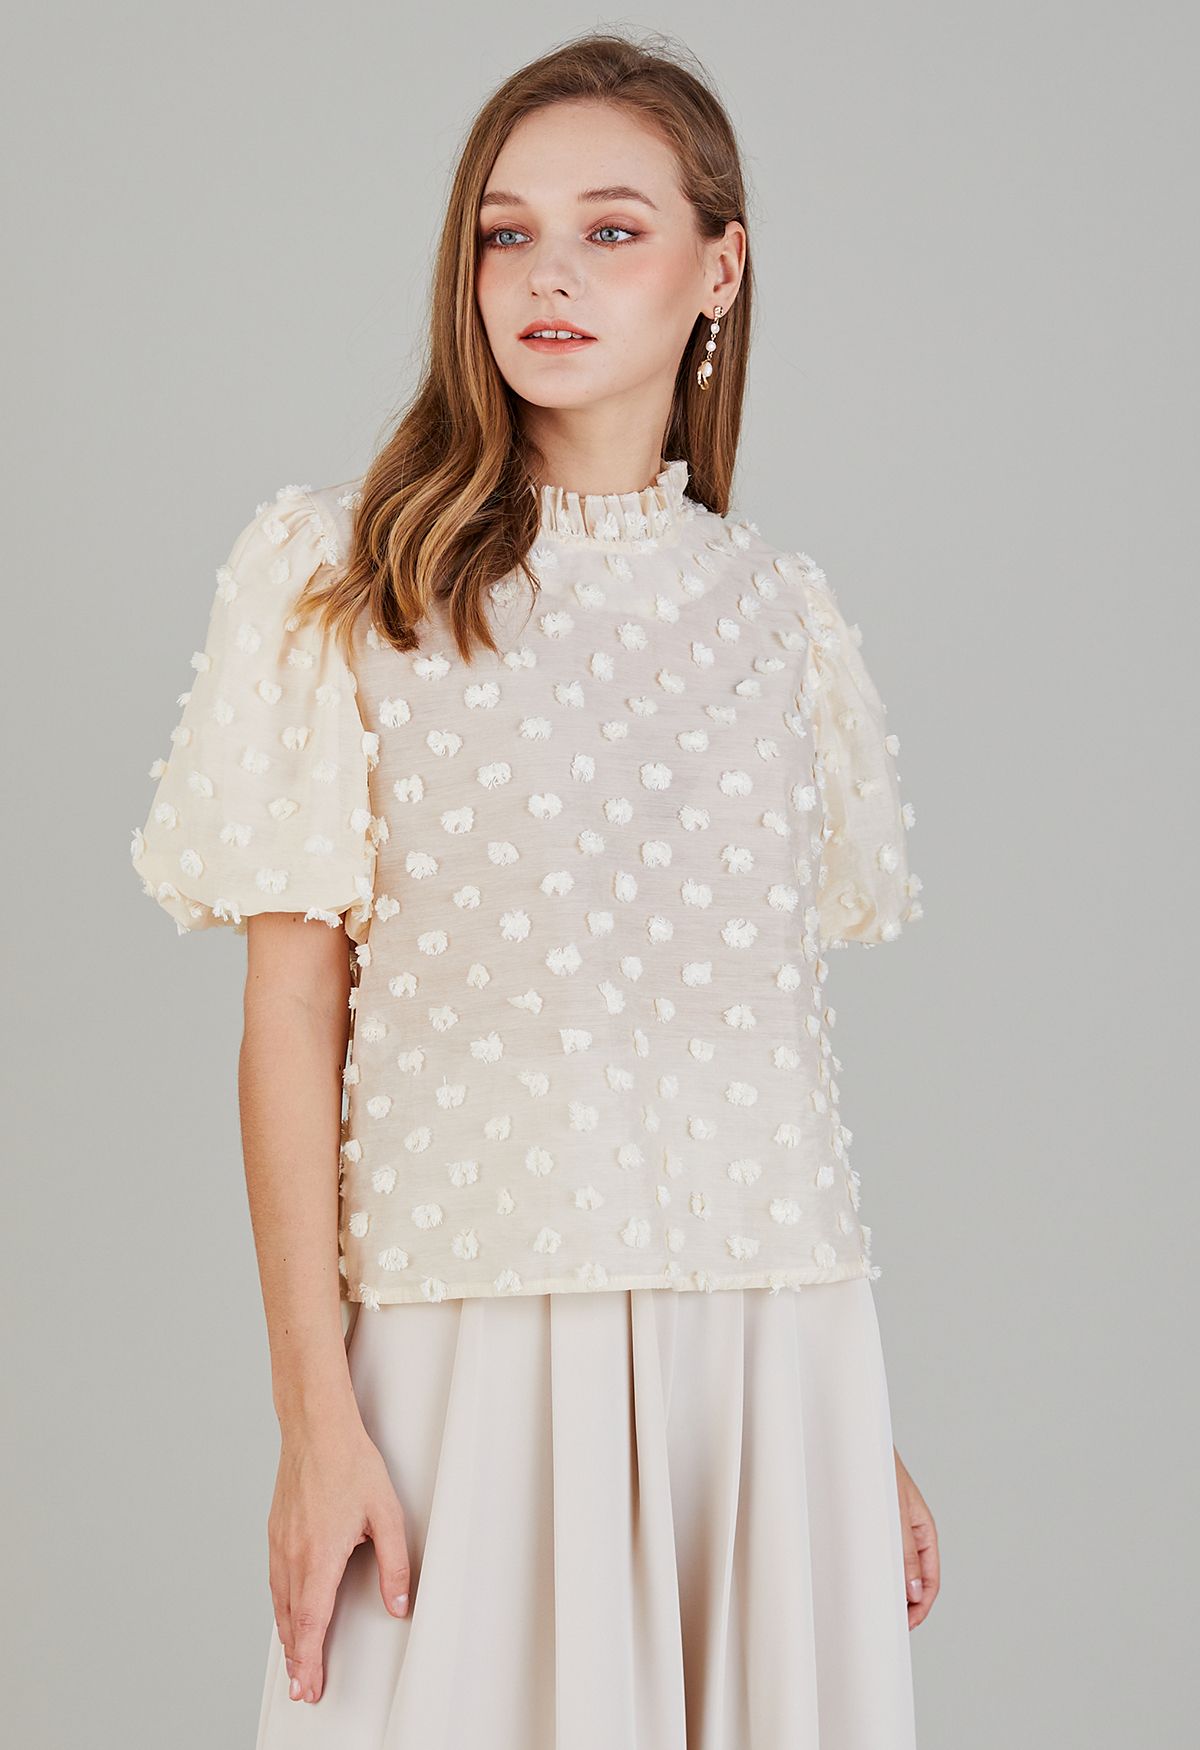 Cotton Candy Short Bubble Sleeve Dolly Top in Cream